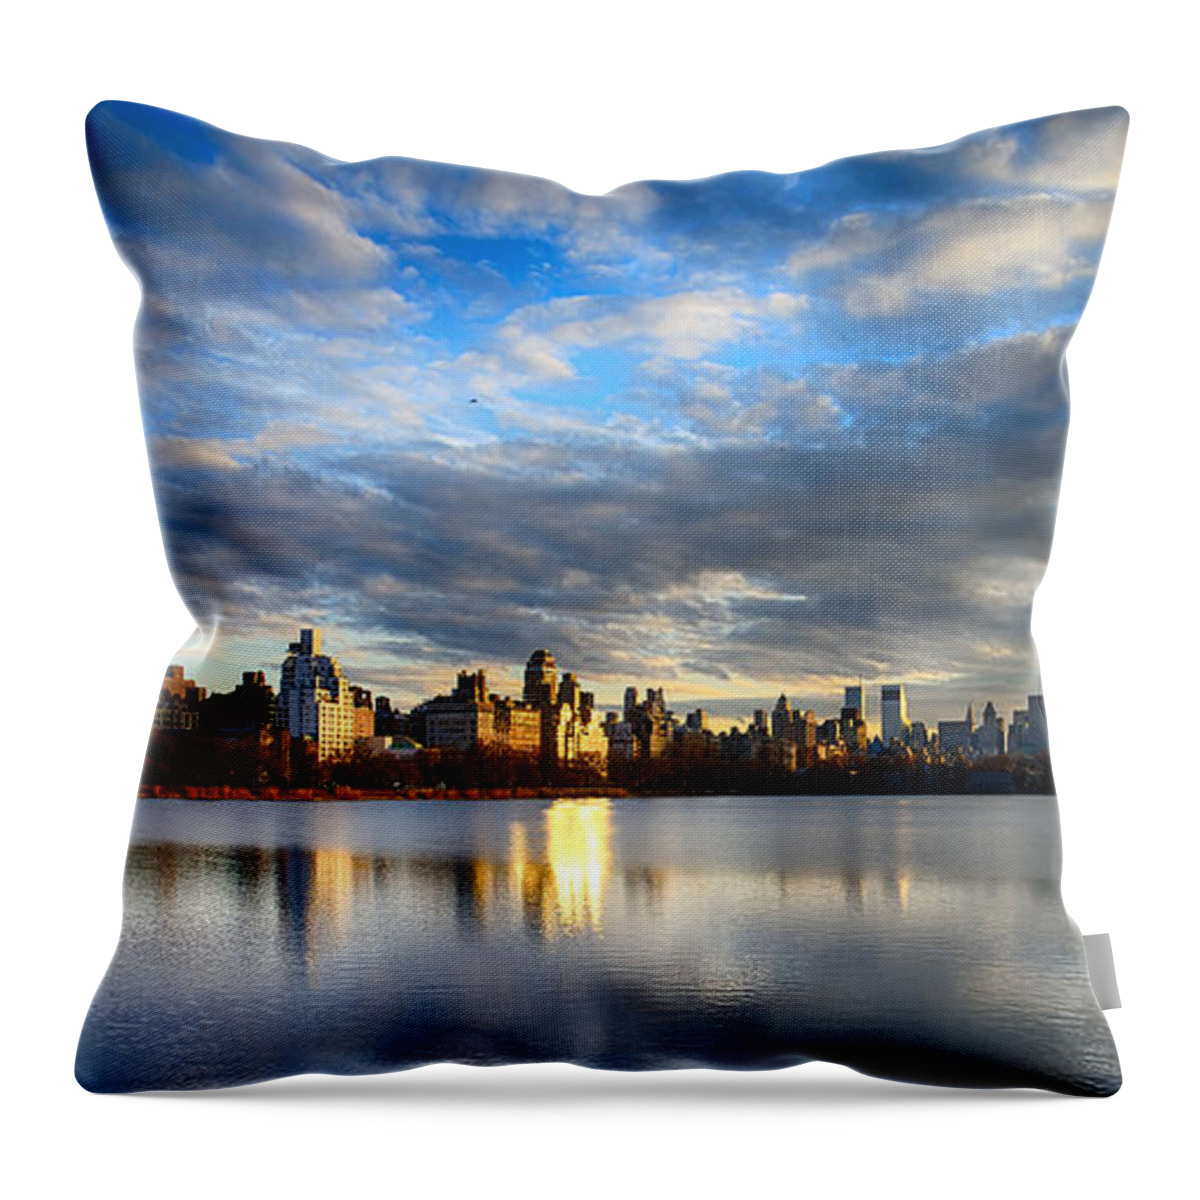 Tranquility Throw Pillow featuring the photograph Jacqueline Kennedy Onassis Reservoir by Joe Josephs Photography